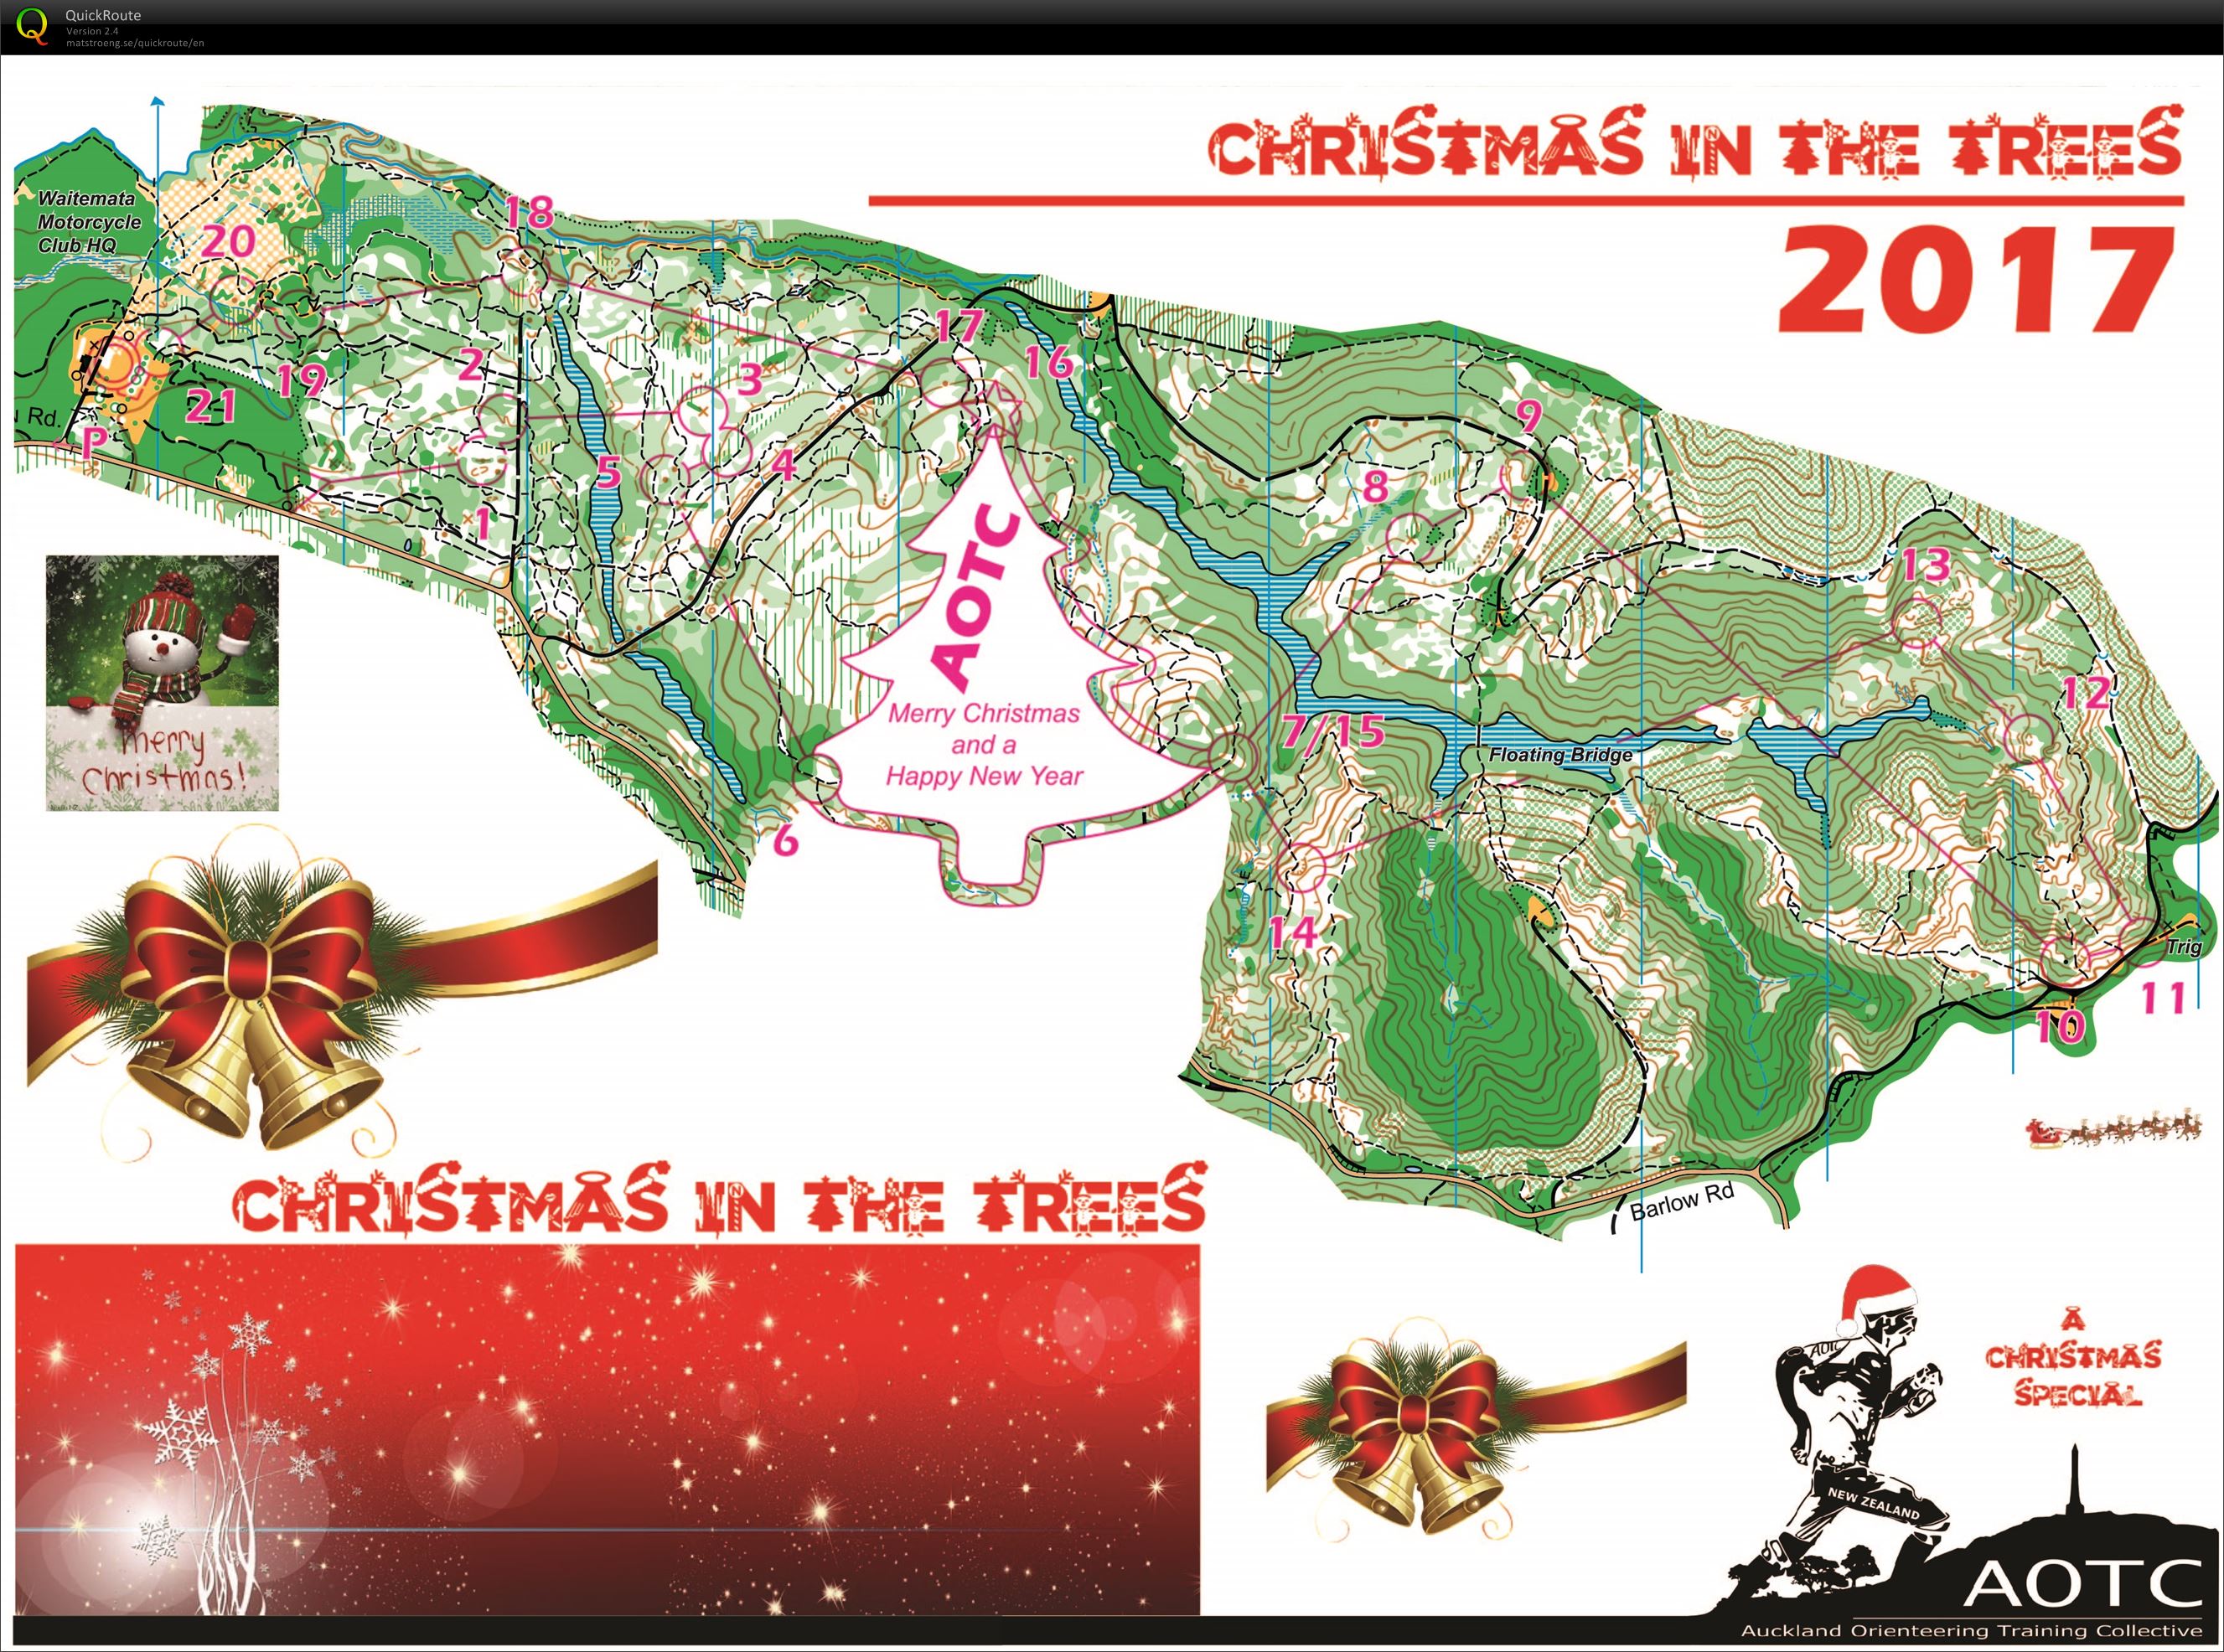 Christmas in the Trees 2017 (16.12.2017)